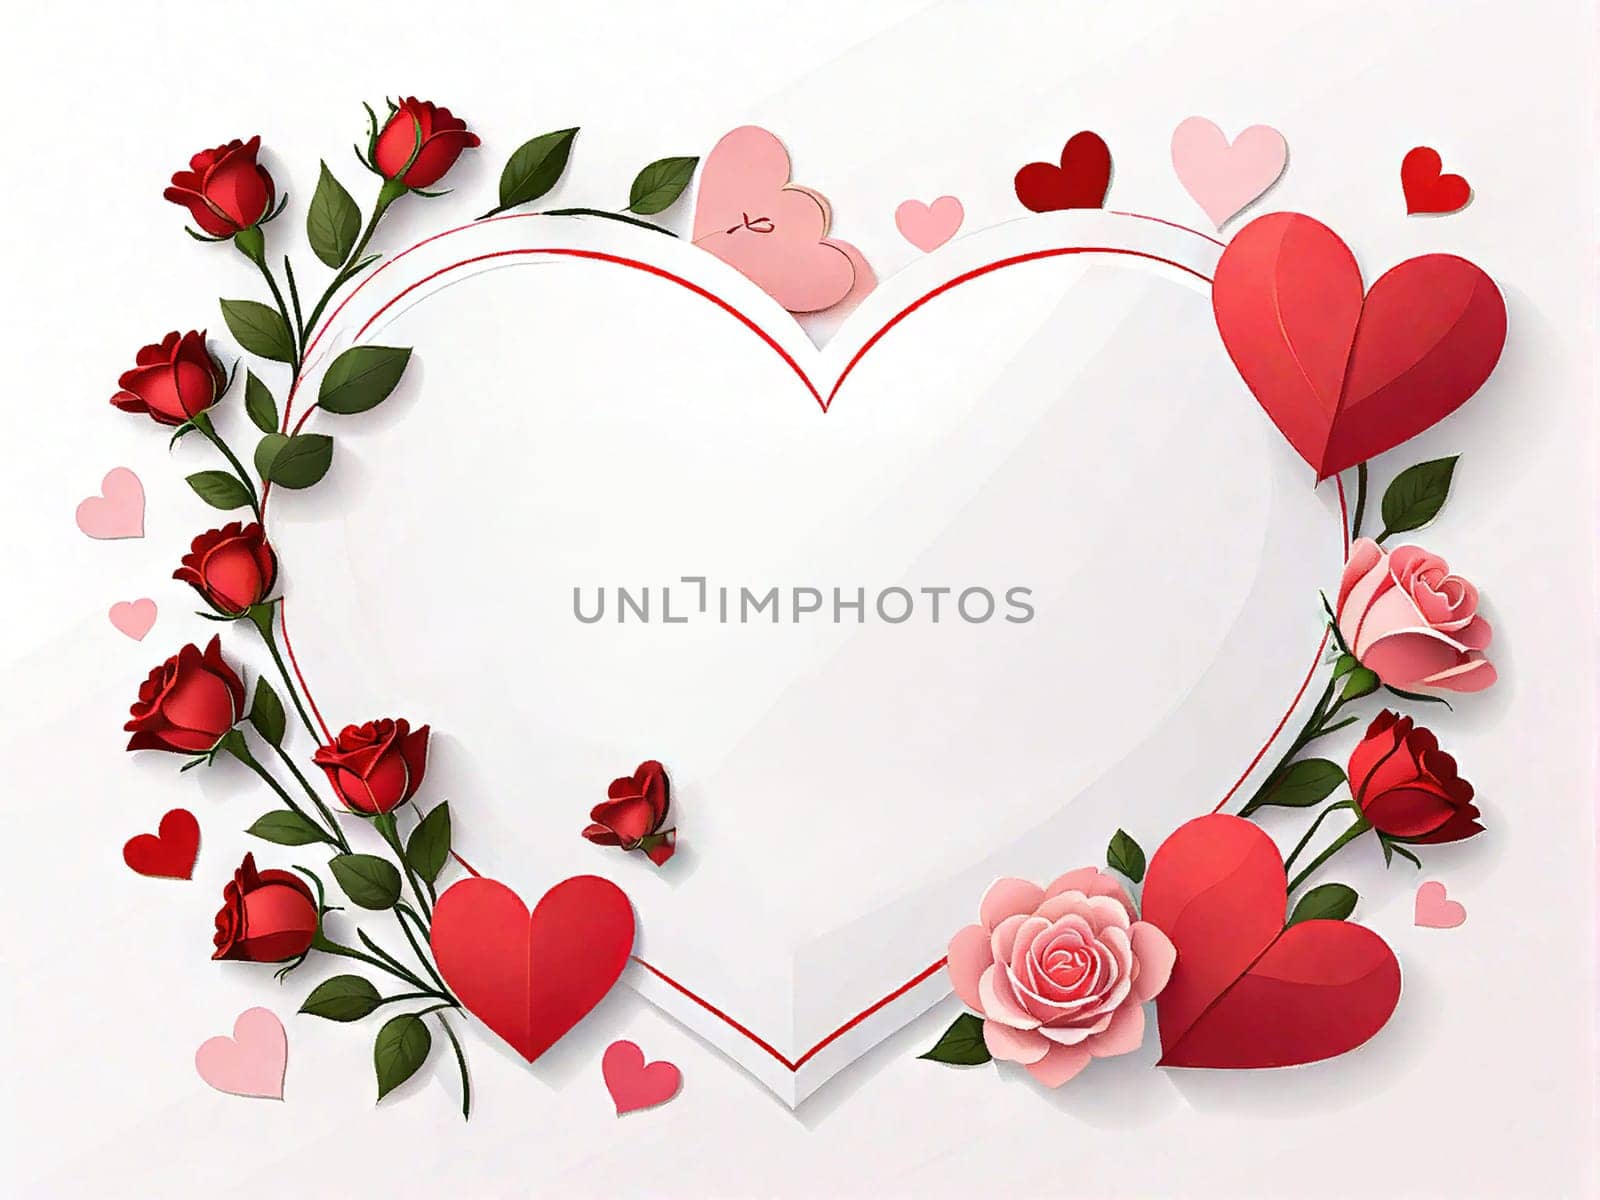 Happy Valentine's Day sale, frame of hearts and flowers on a white background by EkaterinaPereslavtseva